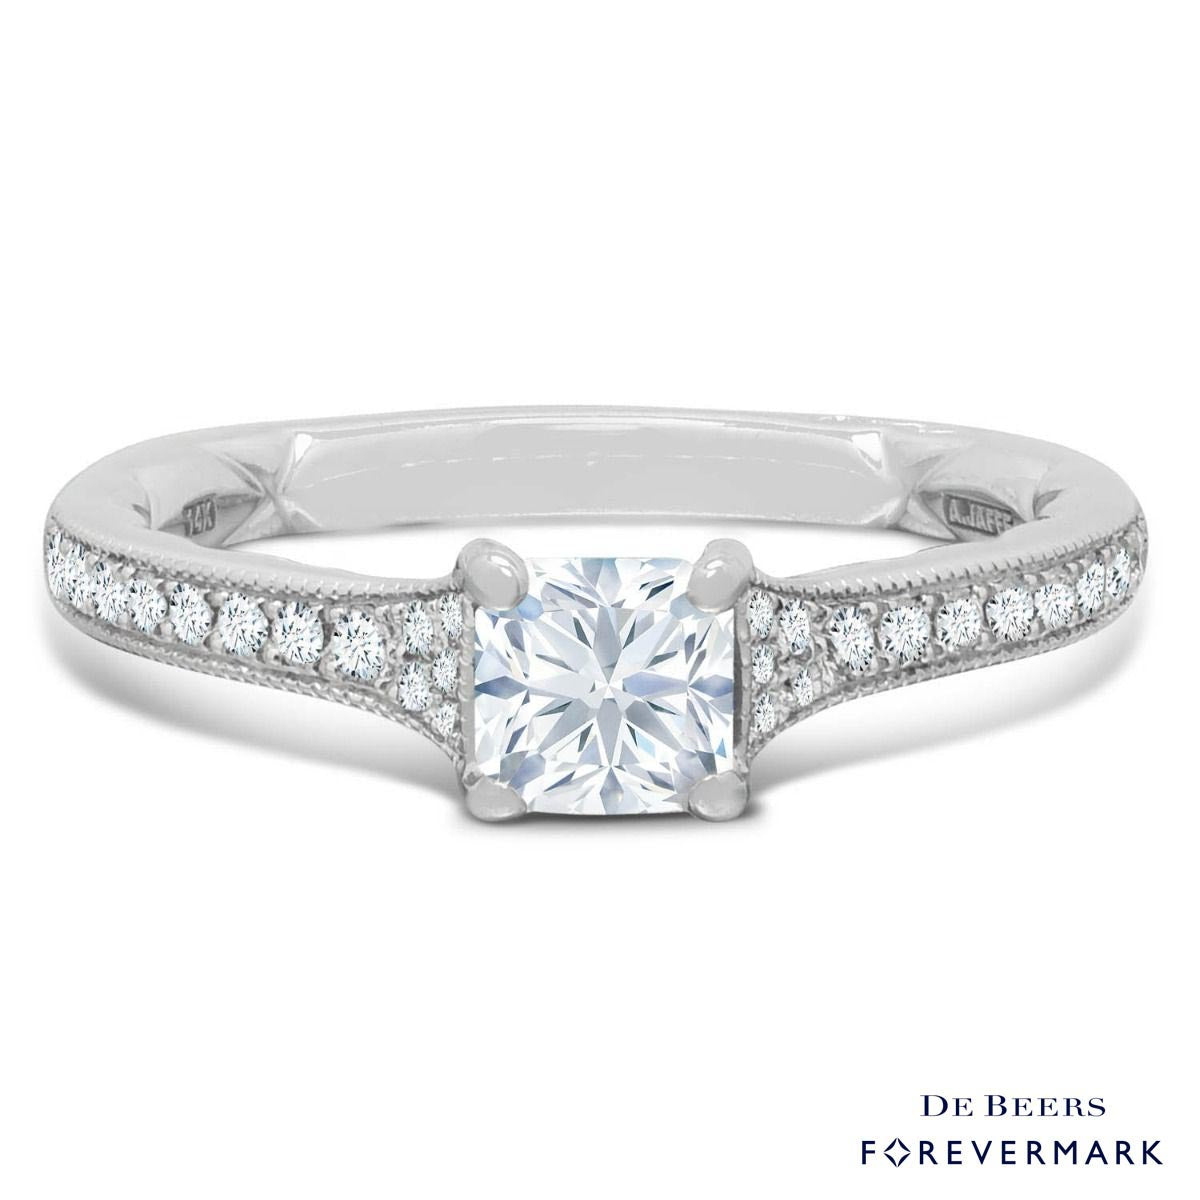 De Beers Forevermark Diamond Square Ideal Cut Engagement Ring in 14kt White Gold (3/4ct tw)